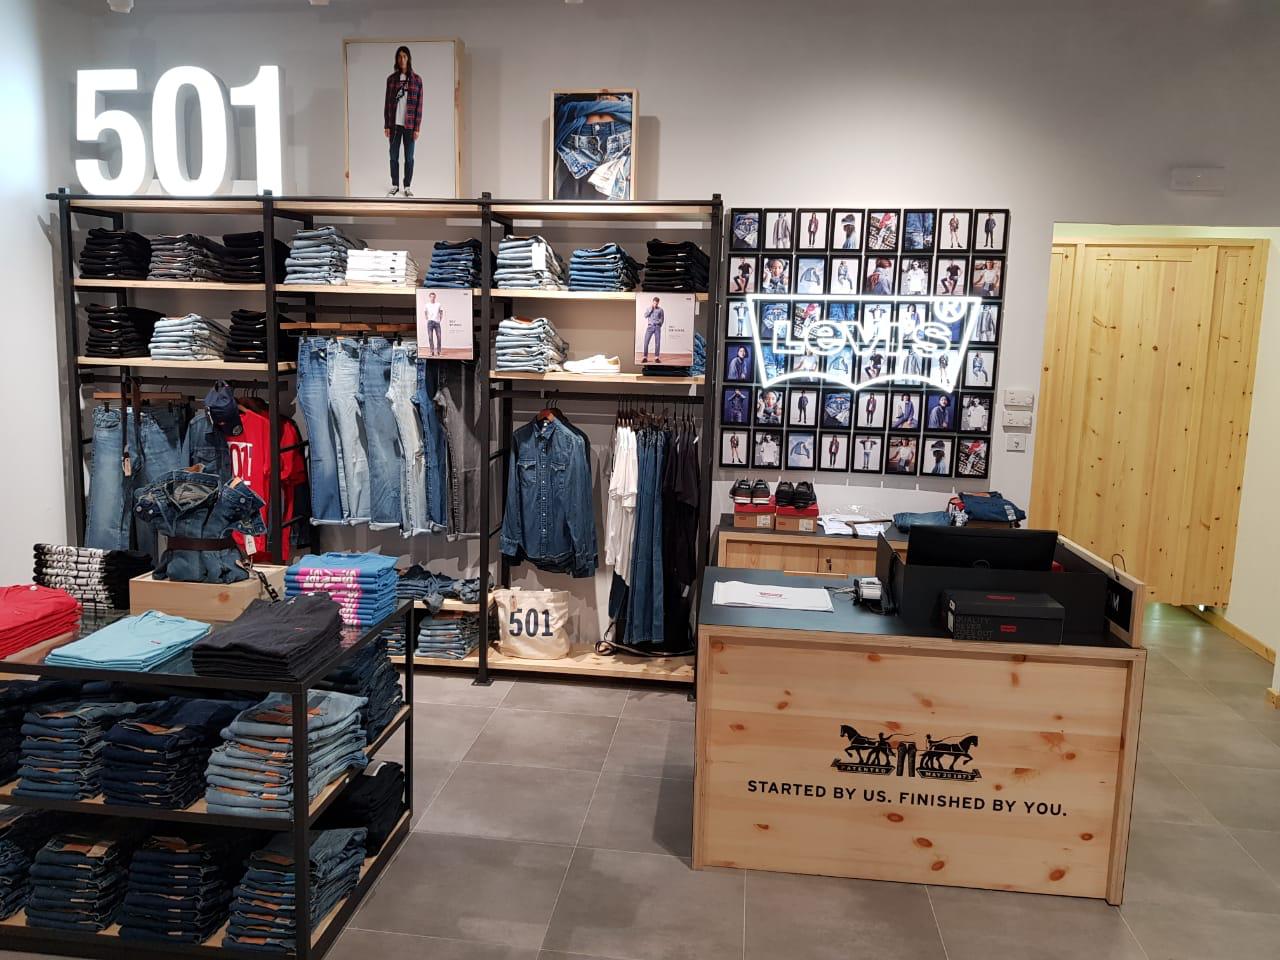 Mercure International : Opening of the 1st Levis store in Morocco in the very heart of Ryad Square' Shopping in Rabat on 17th of june.